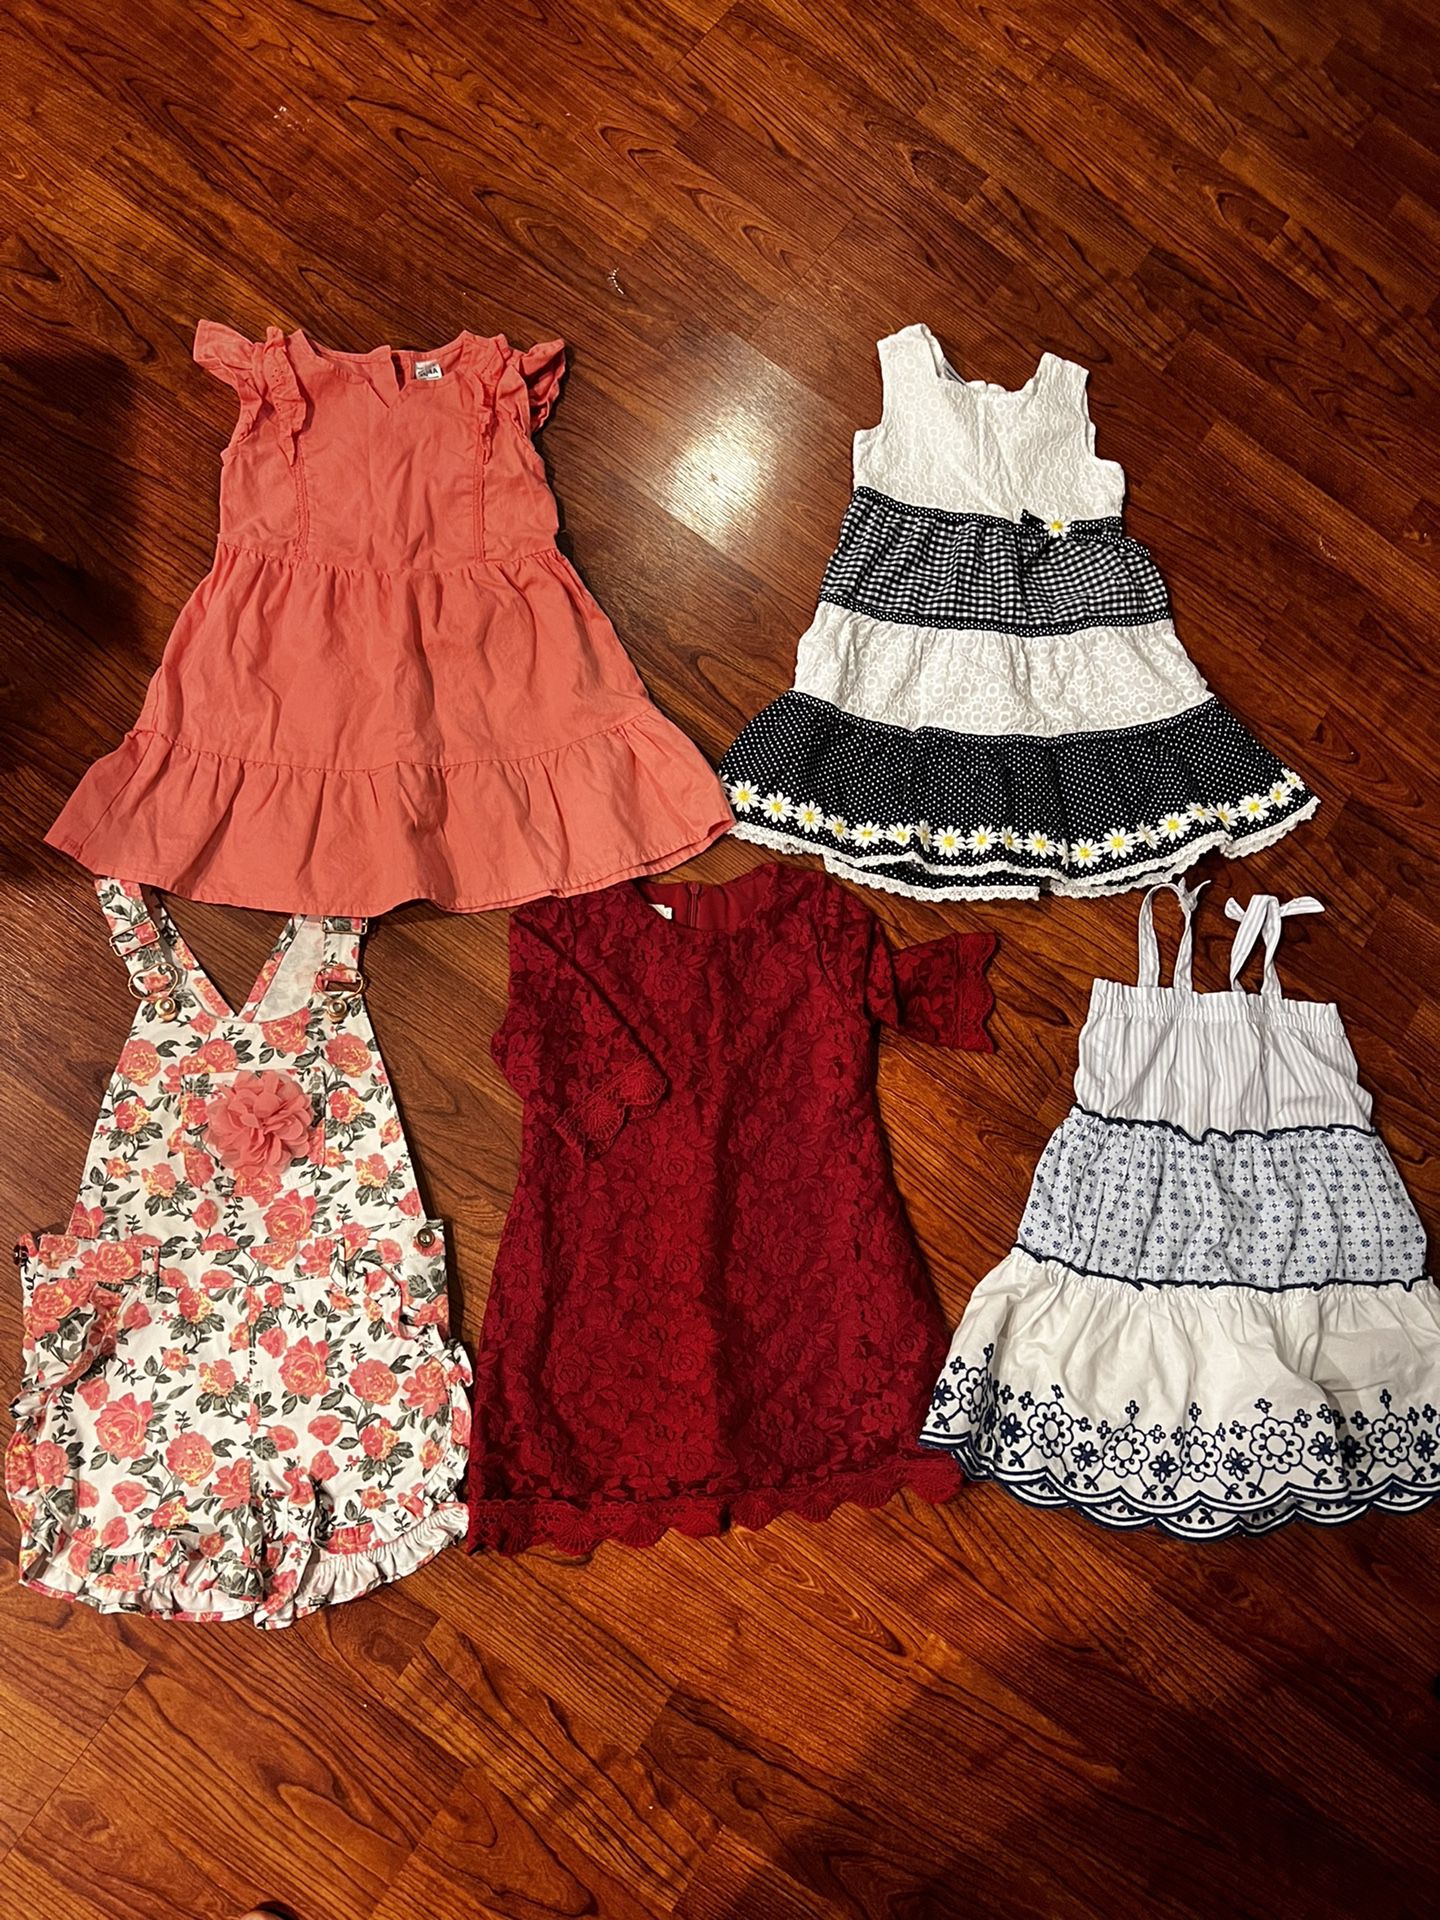 Girl Cloth 3T-4T All For $20